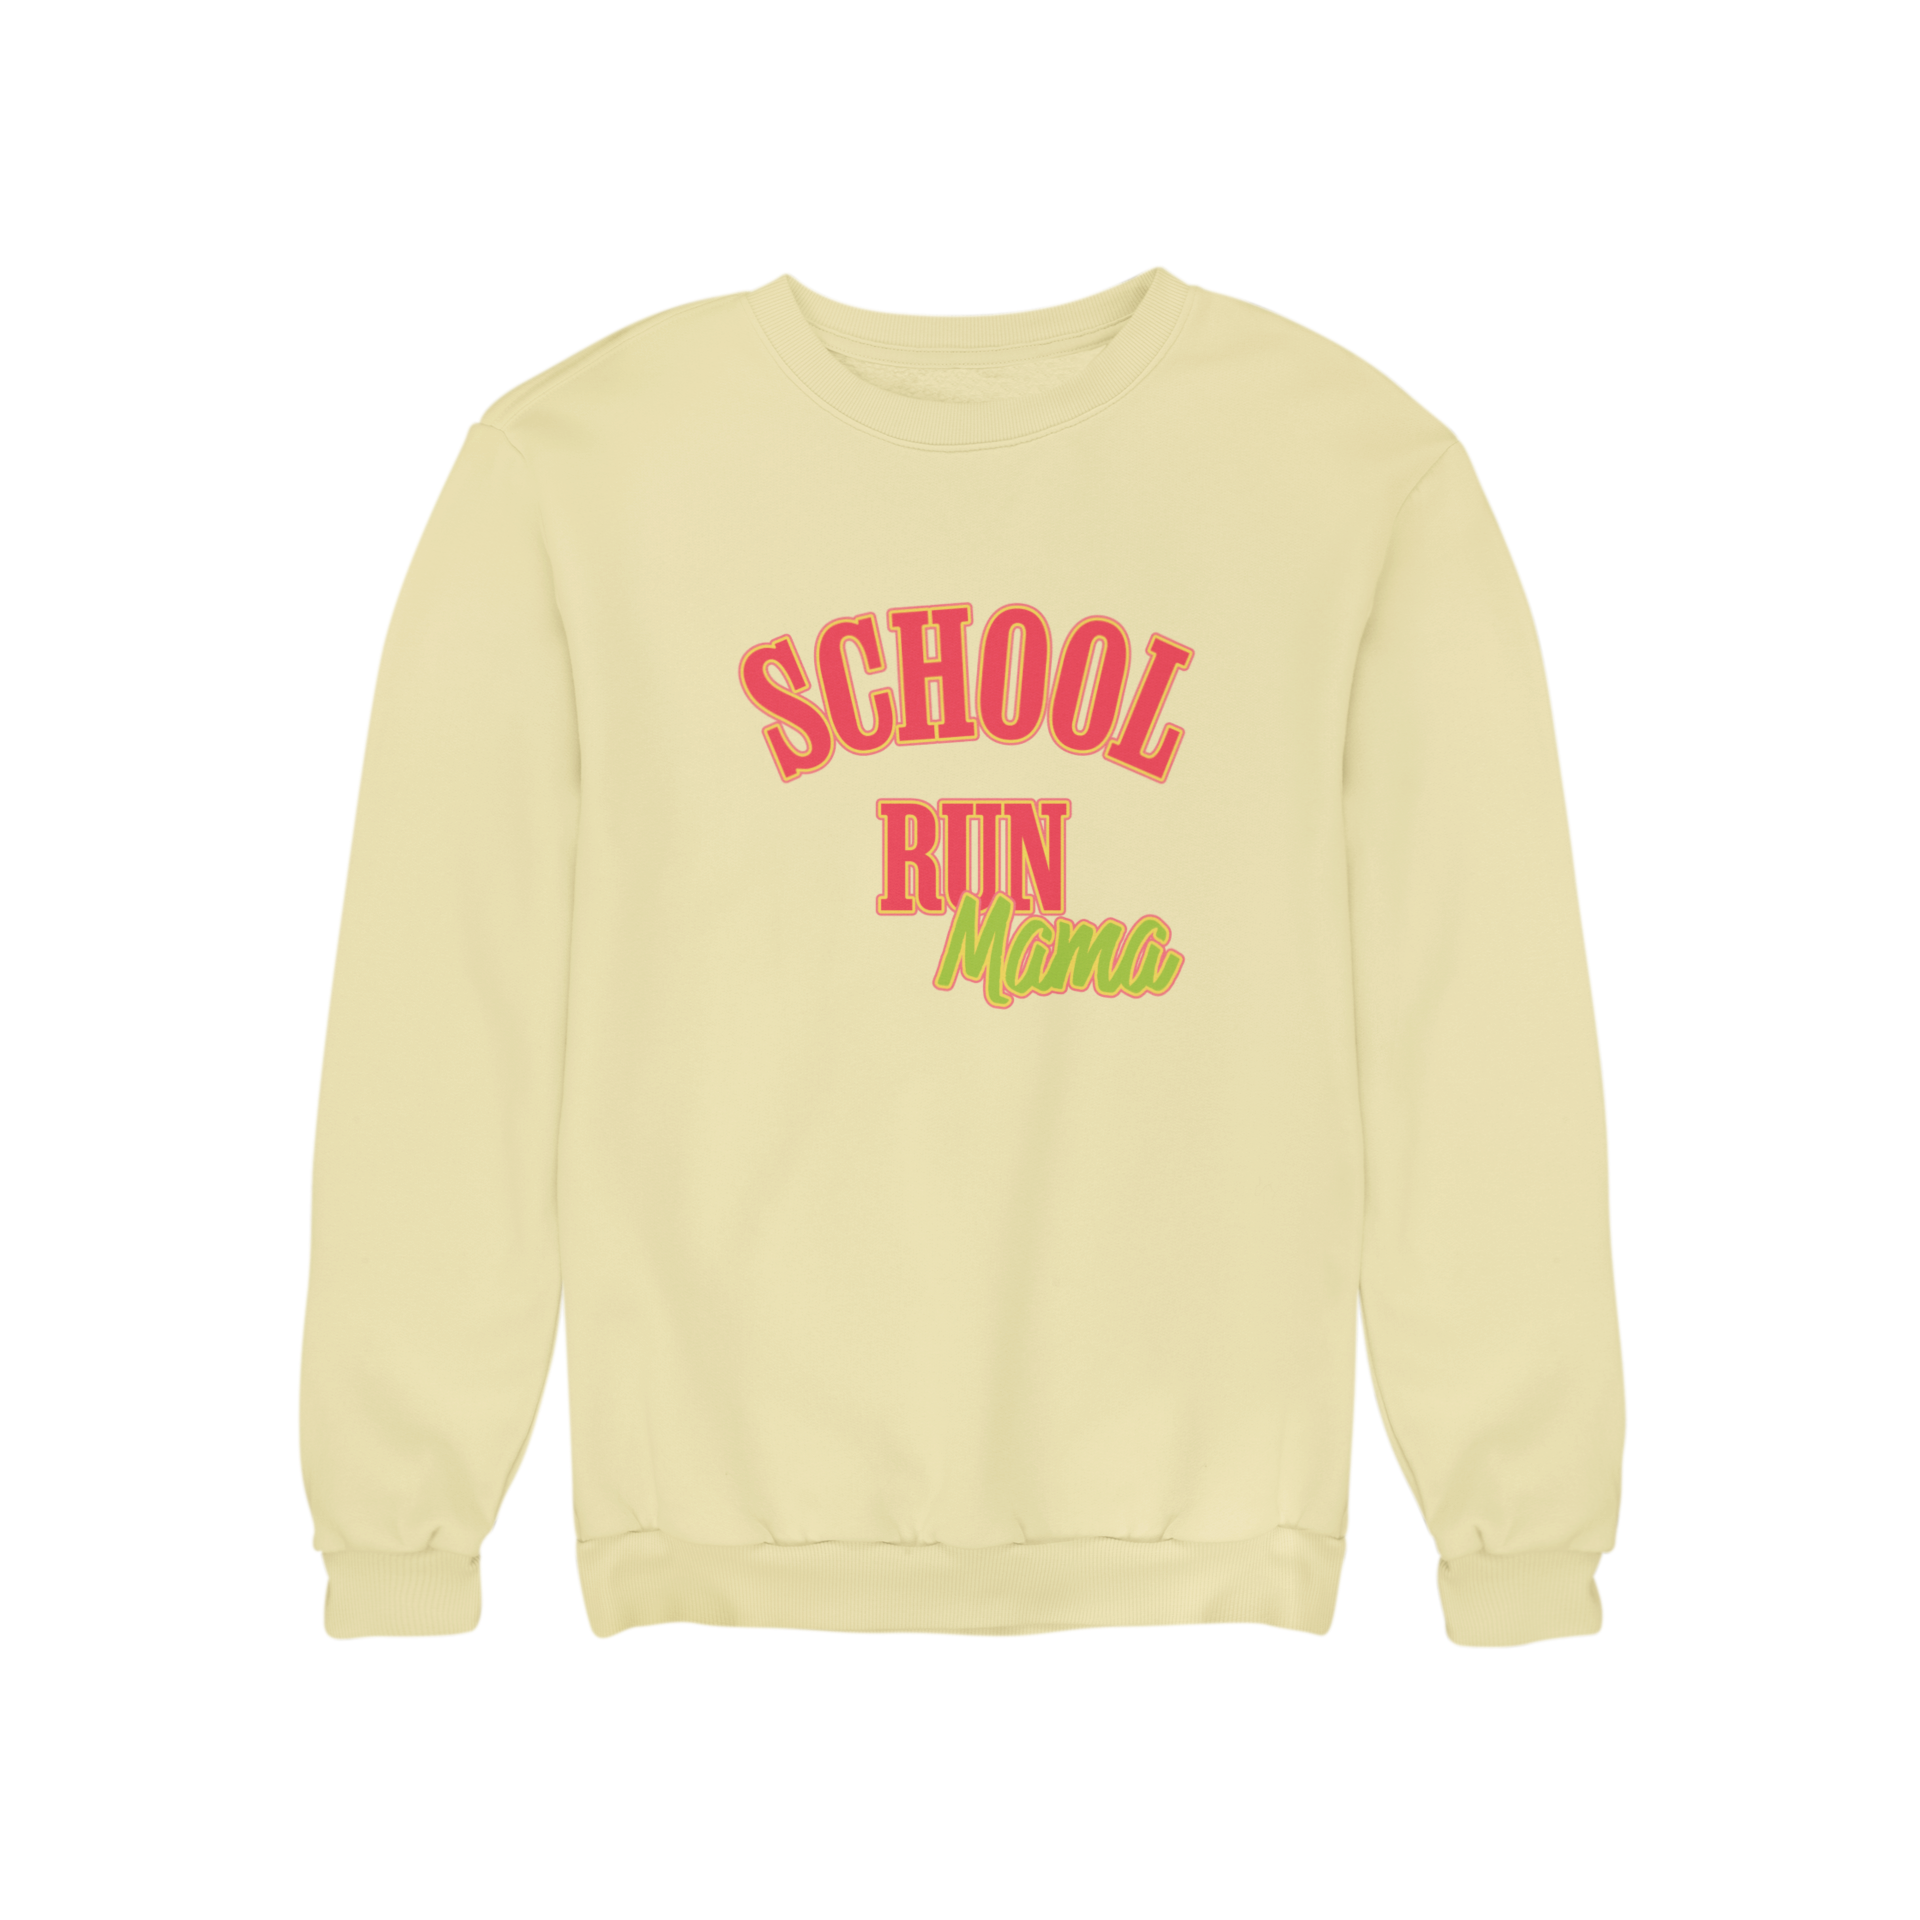 Looking for a perfect sweatshirt for the school run? Check out Teevolution's "School Run Mama" slogan sweatshirt. It's perfect for any mum who wants to be stylish and comfortable while taking her kids to school. Get yours now and make a statement on the school run!